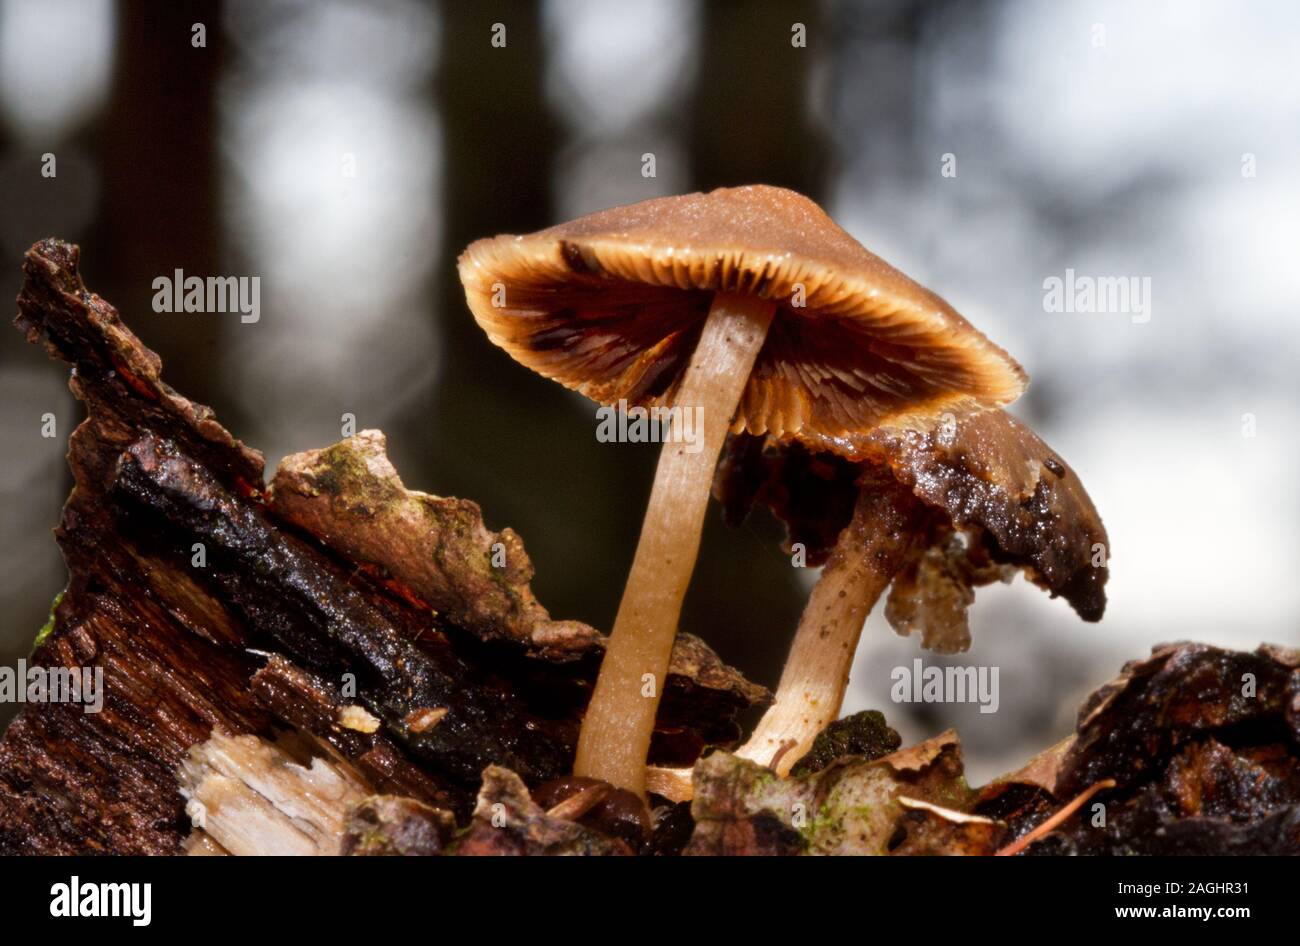 Slimy decaying Mycena mushrooms on moist rotting wood in a forest Stock Photo